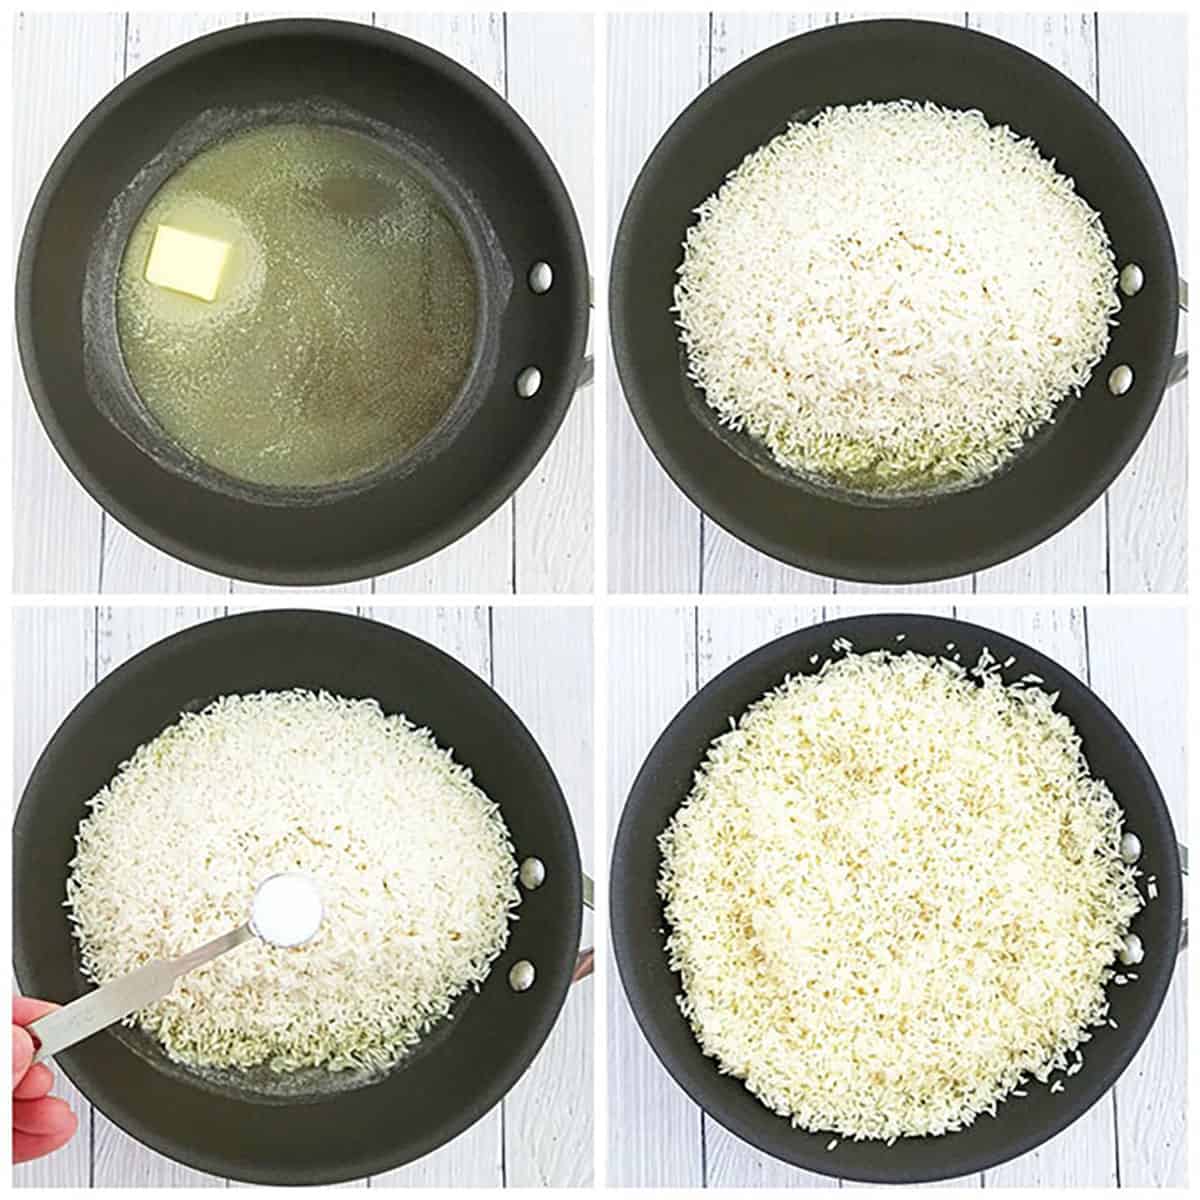 add the well-drained rice, sprinkle some salt, and fry it for 7 minutes, stirring every 30 seconds.